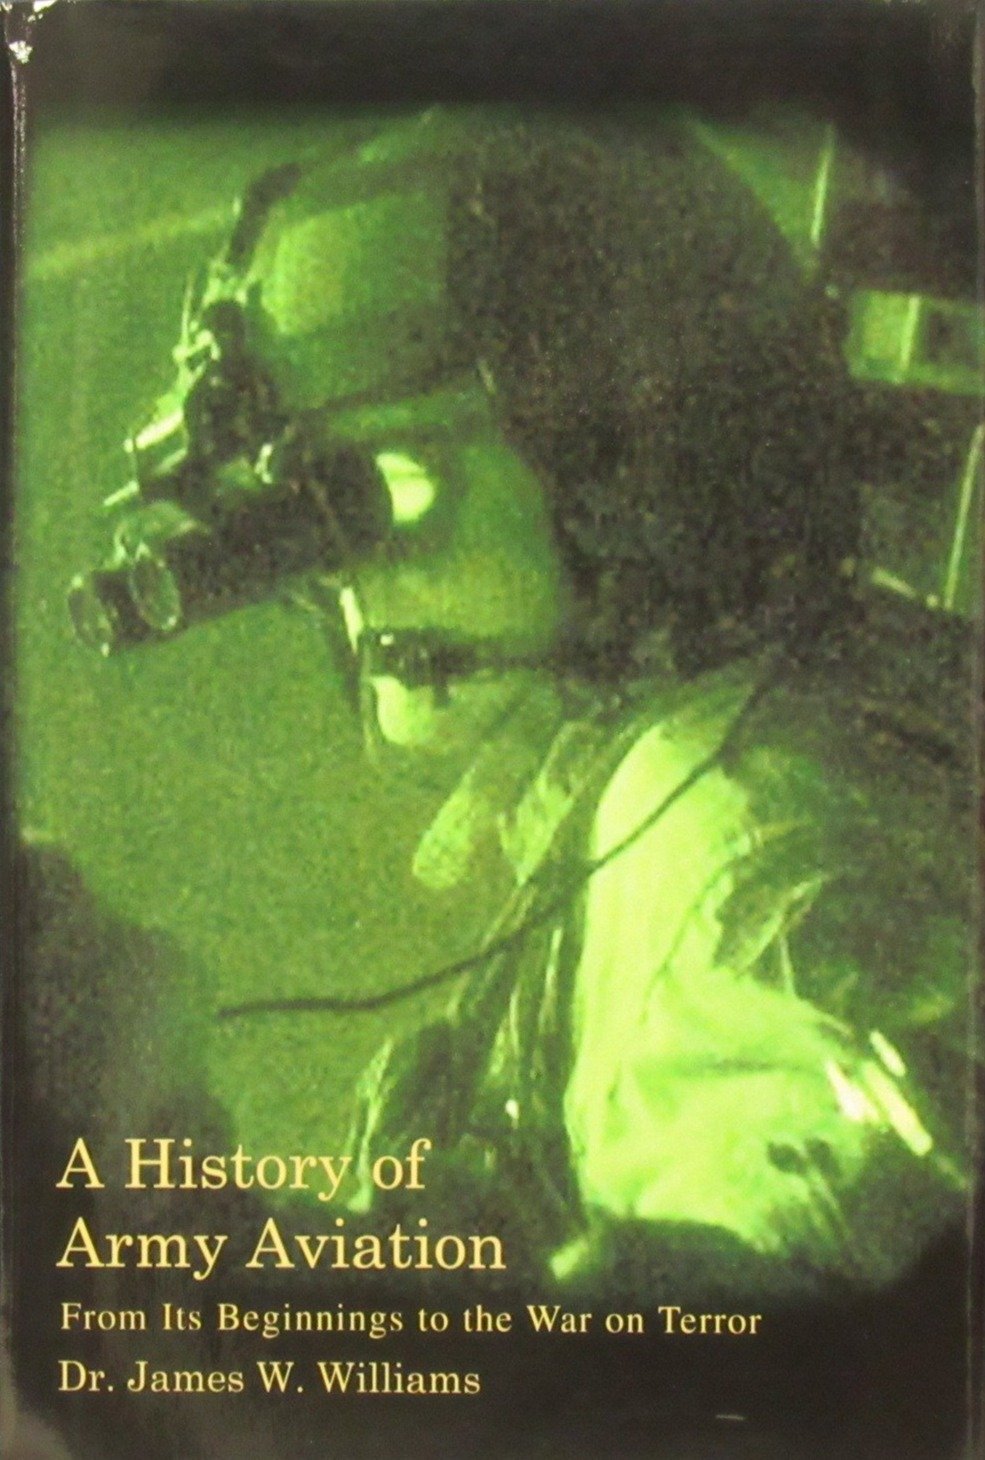 A History of Army Aviation by Dr. James W. Williams